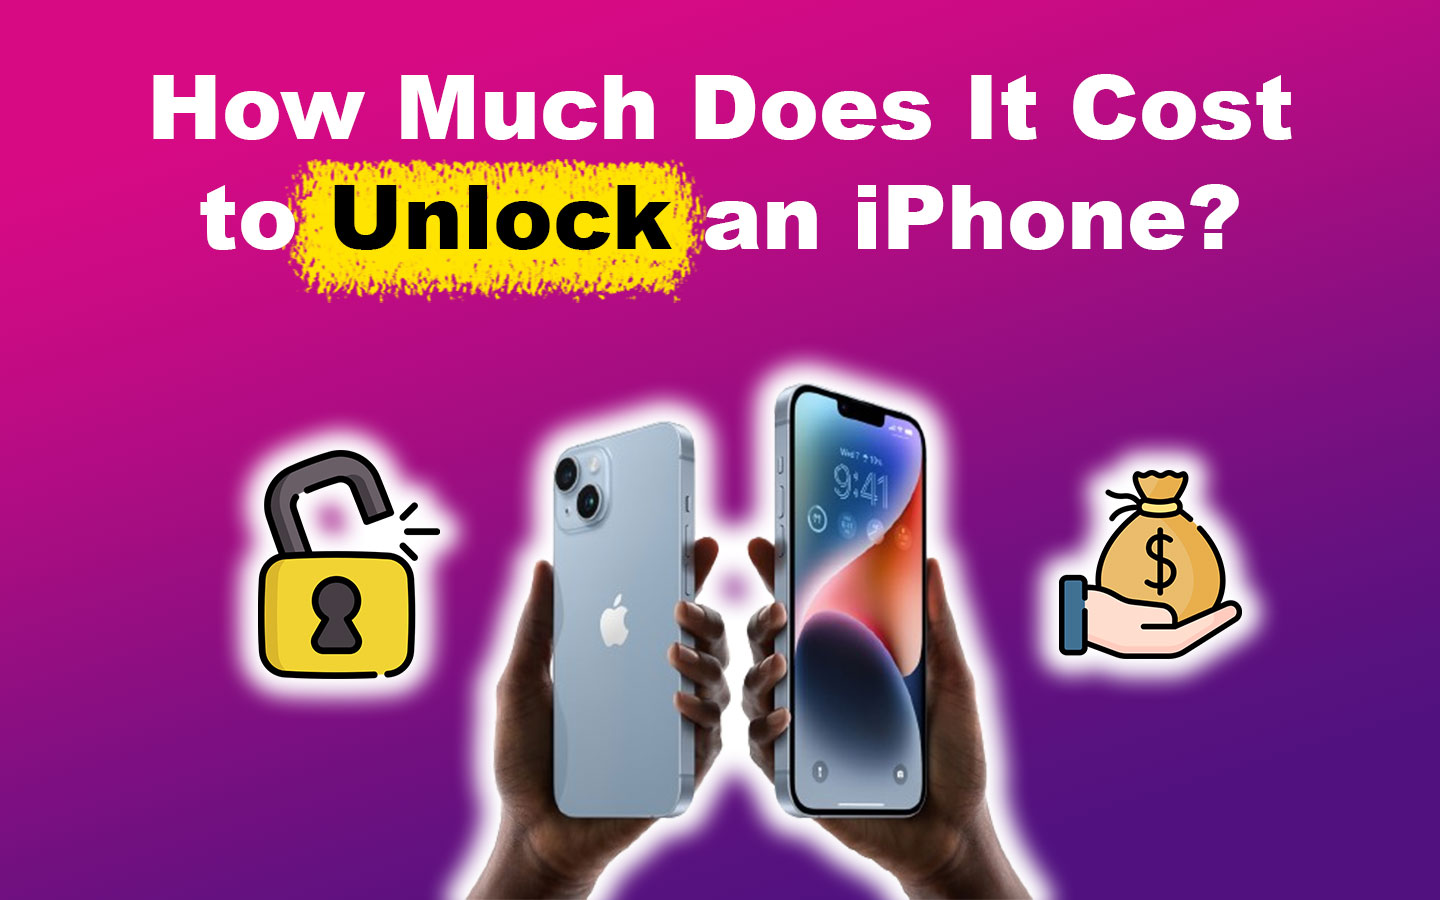 How Much Does It Cost to Unlock an iPhone